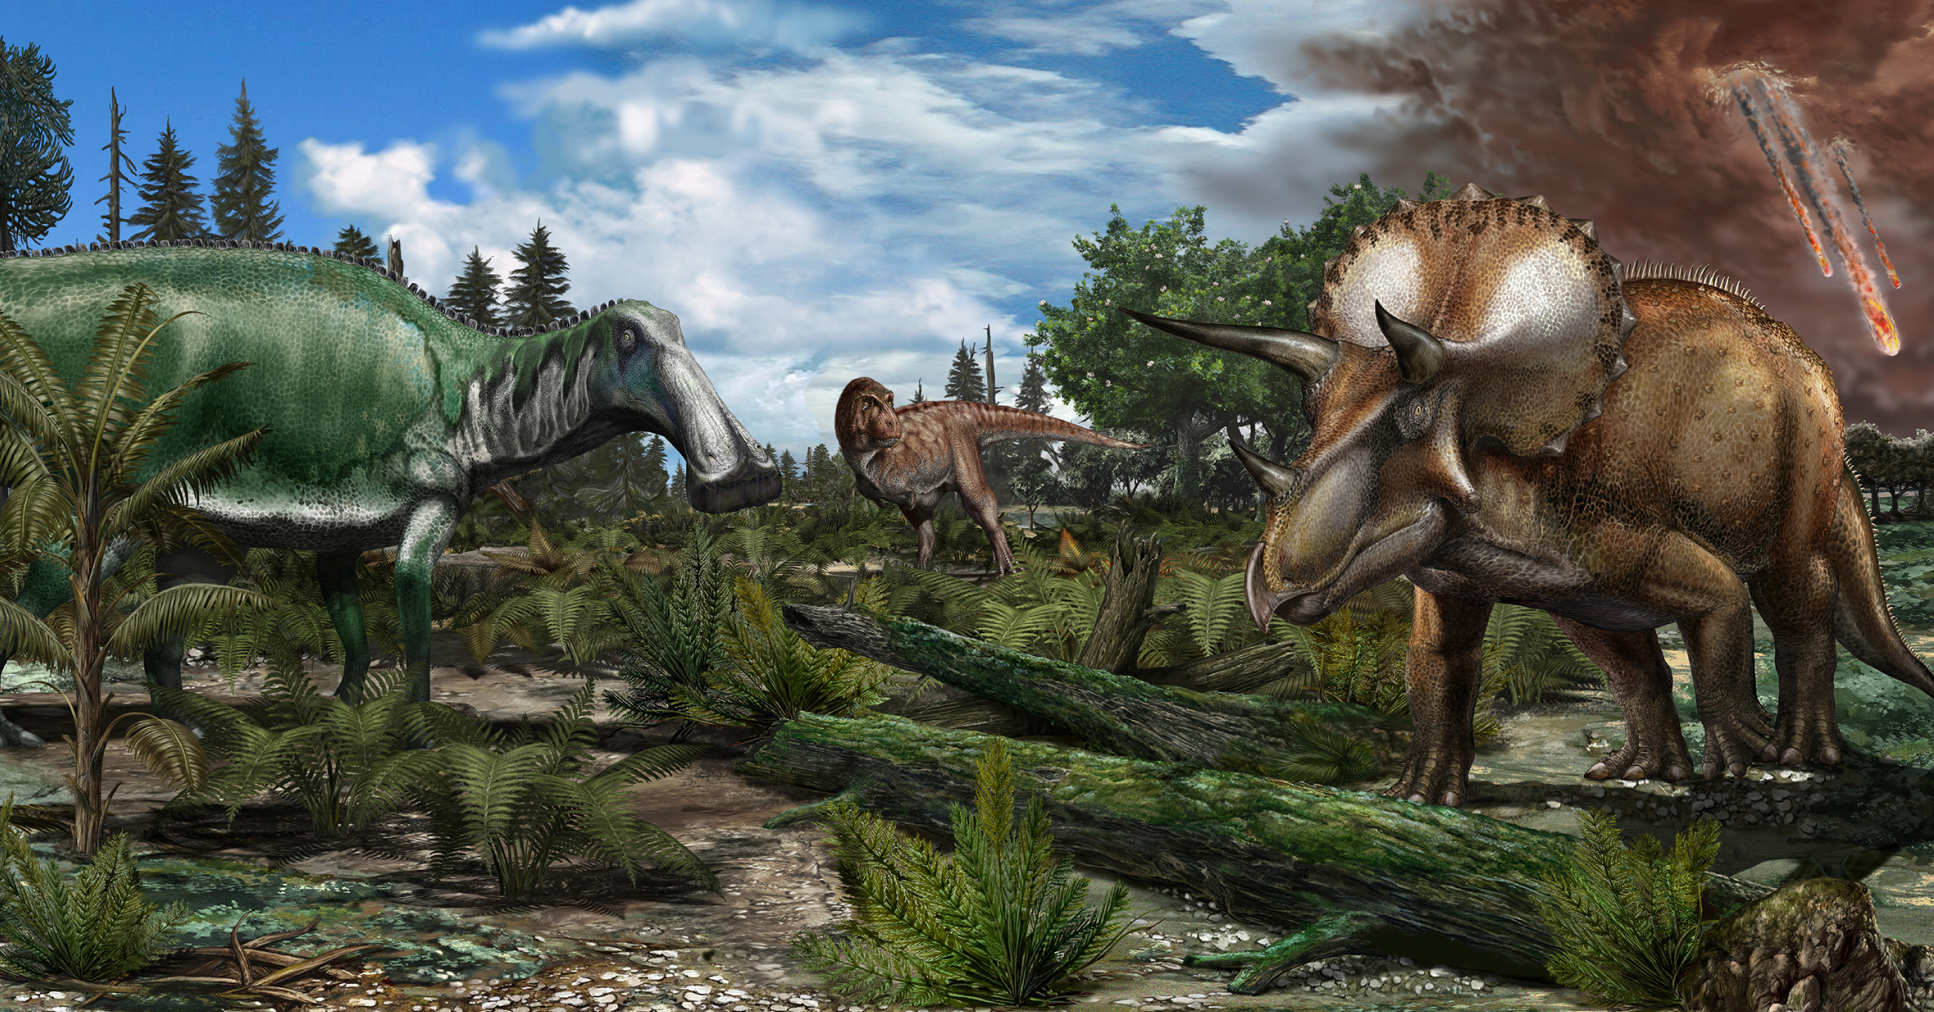 Reconstruction of a late Maastrichtian (.66 million years ago) palaeoenvironment in North America, where a floodplain is roamed by dinosaurs like Tyrannosaurus rex, Edmontosaurus and Triceratops. Image credit: Davide Bonadonna